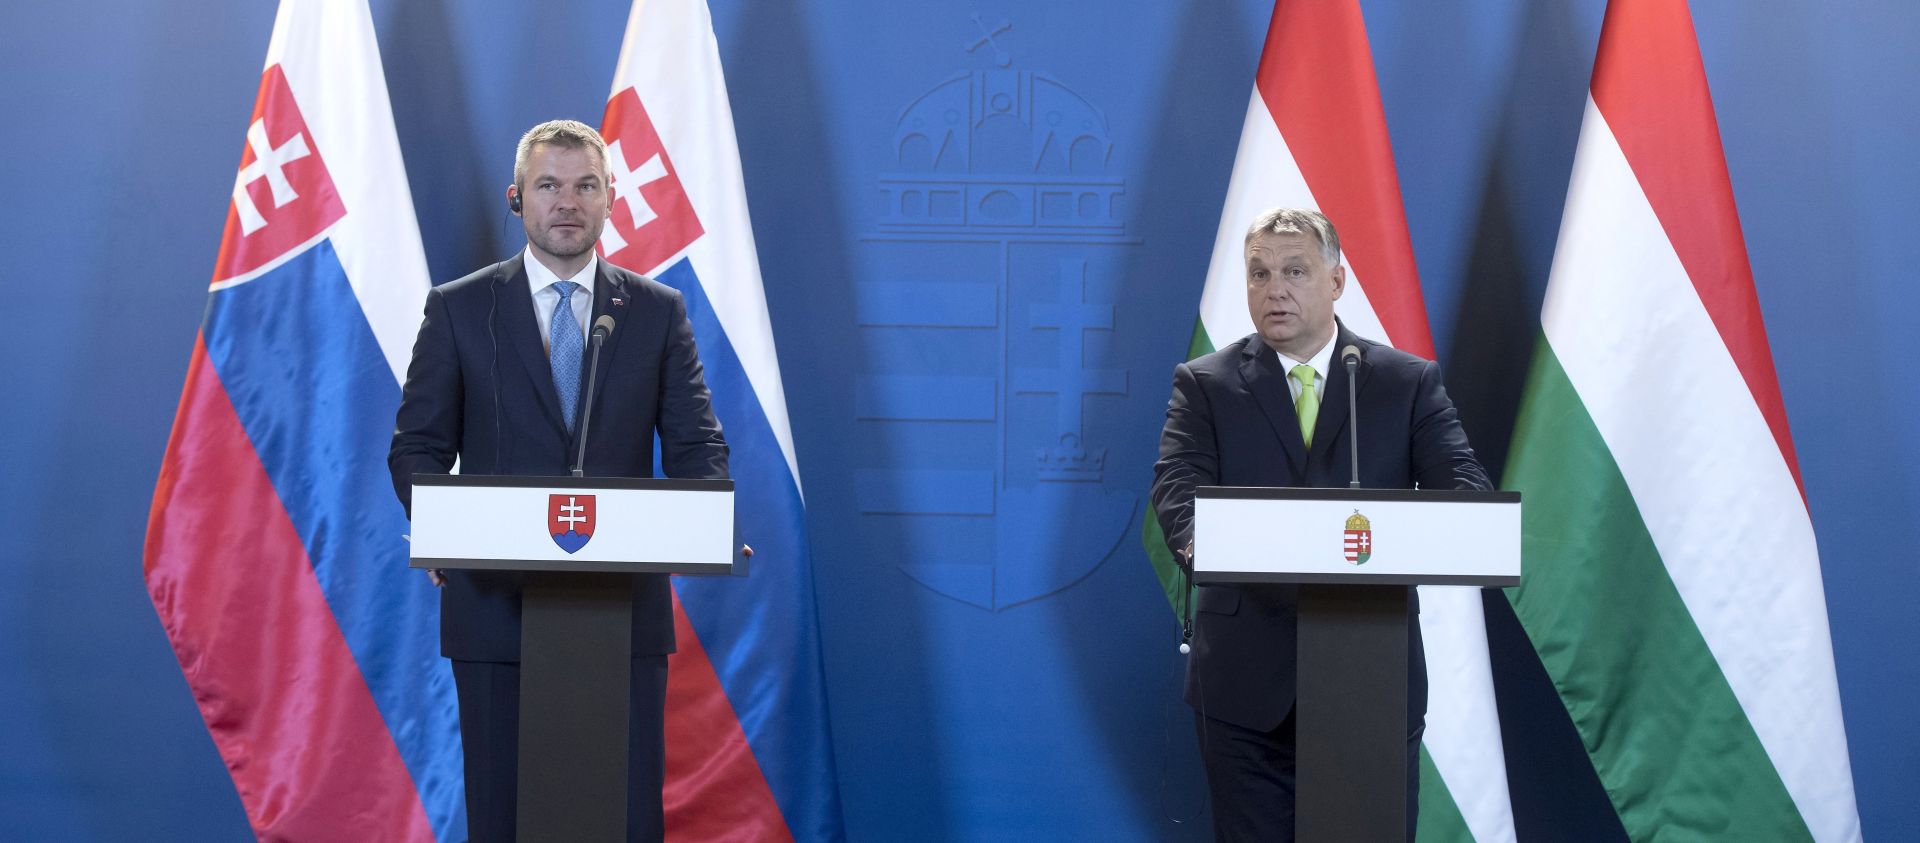 epa06802085 Hungarian Prime Minister Viktor Orban (R) and his Slovakian counterpart Peter Pellegrini  (L) deliver their statements at a joint press conference following their meeting in the parliament building in Budapest, Hungary, 12 June 2018.  EPA/Szilard Koszticsak HUNGARY OUT